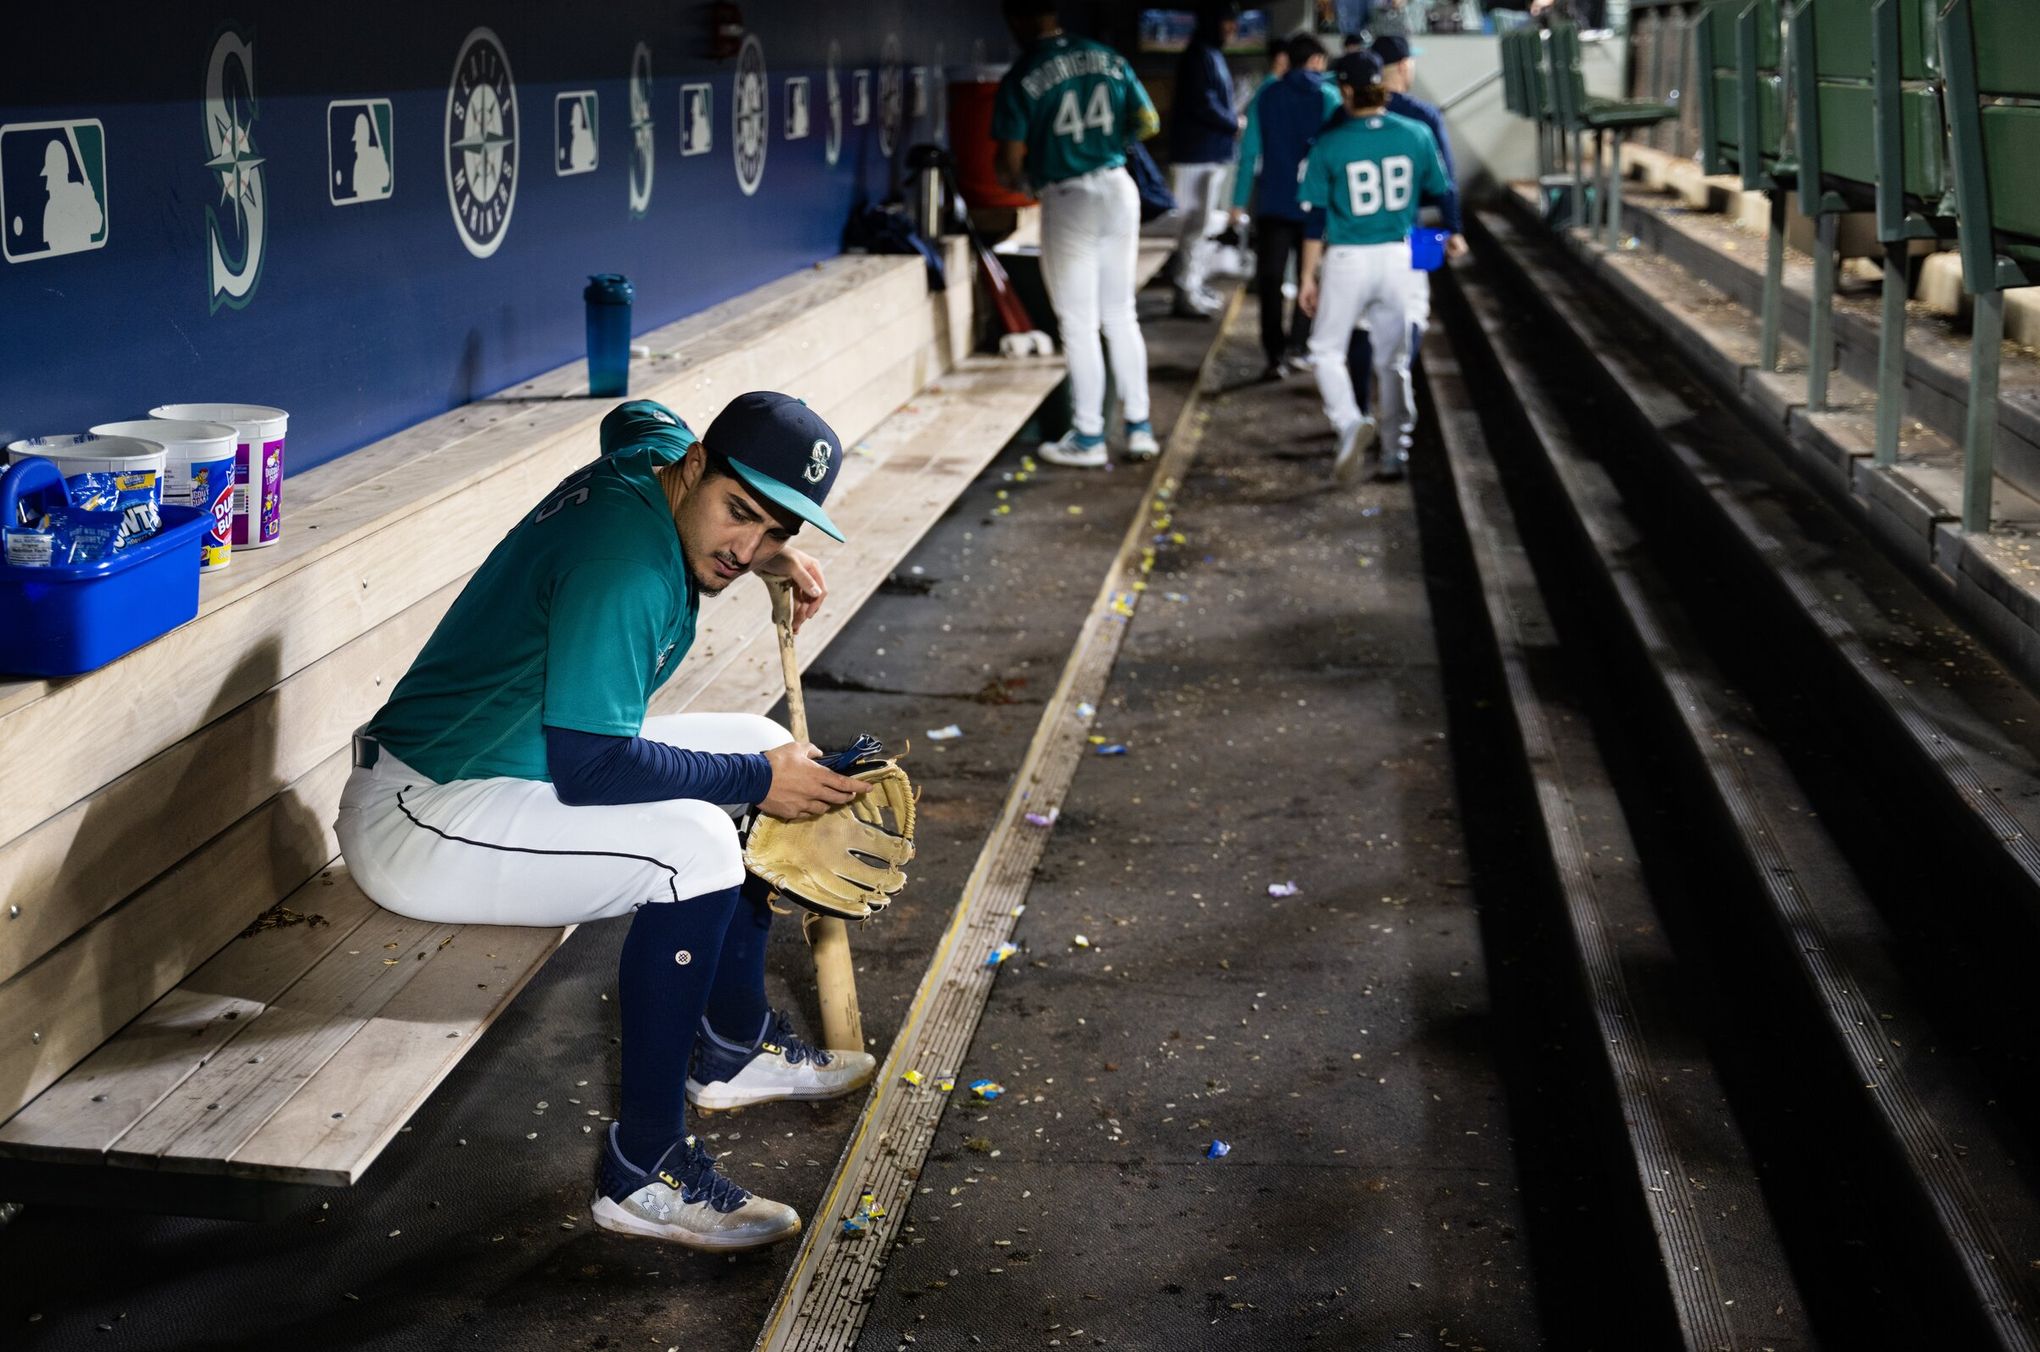 Another bullpen collapse, and another Mariners loss